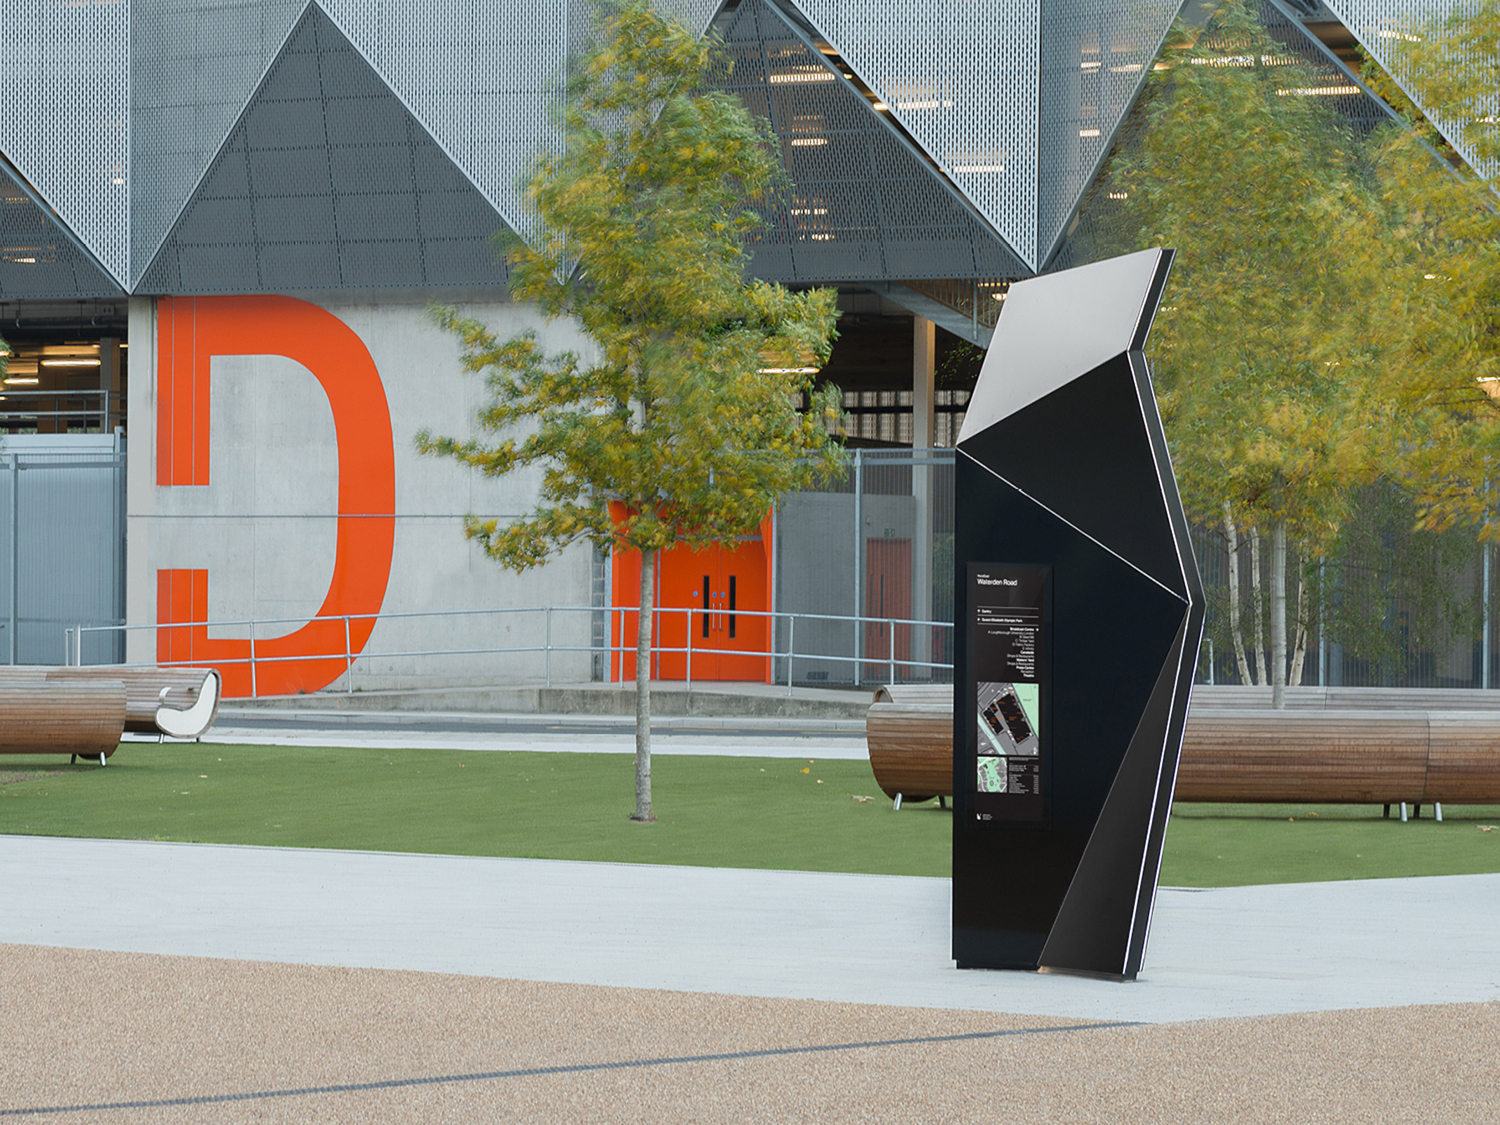 Wafinding system and signage designed by dn&co. for commercial space and tech hub Here East